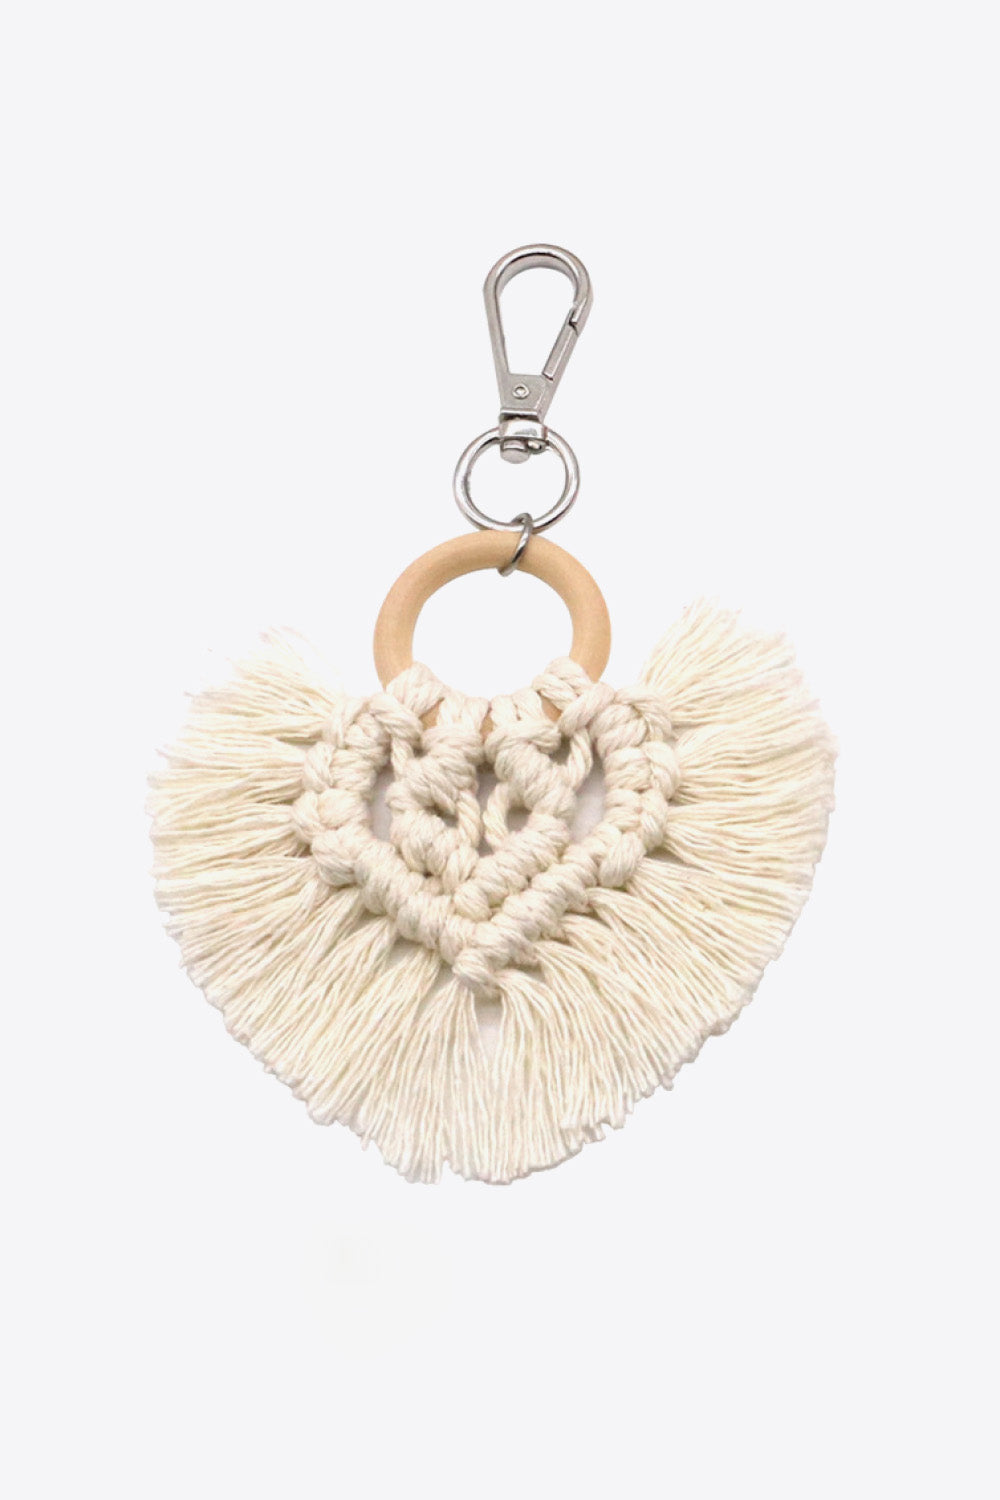 Trendsi Cupid Beauty Supplies Cream / One Size Keychains Assorted 4-Pack Heart-Shaped Macrame Fringe Keychain